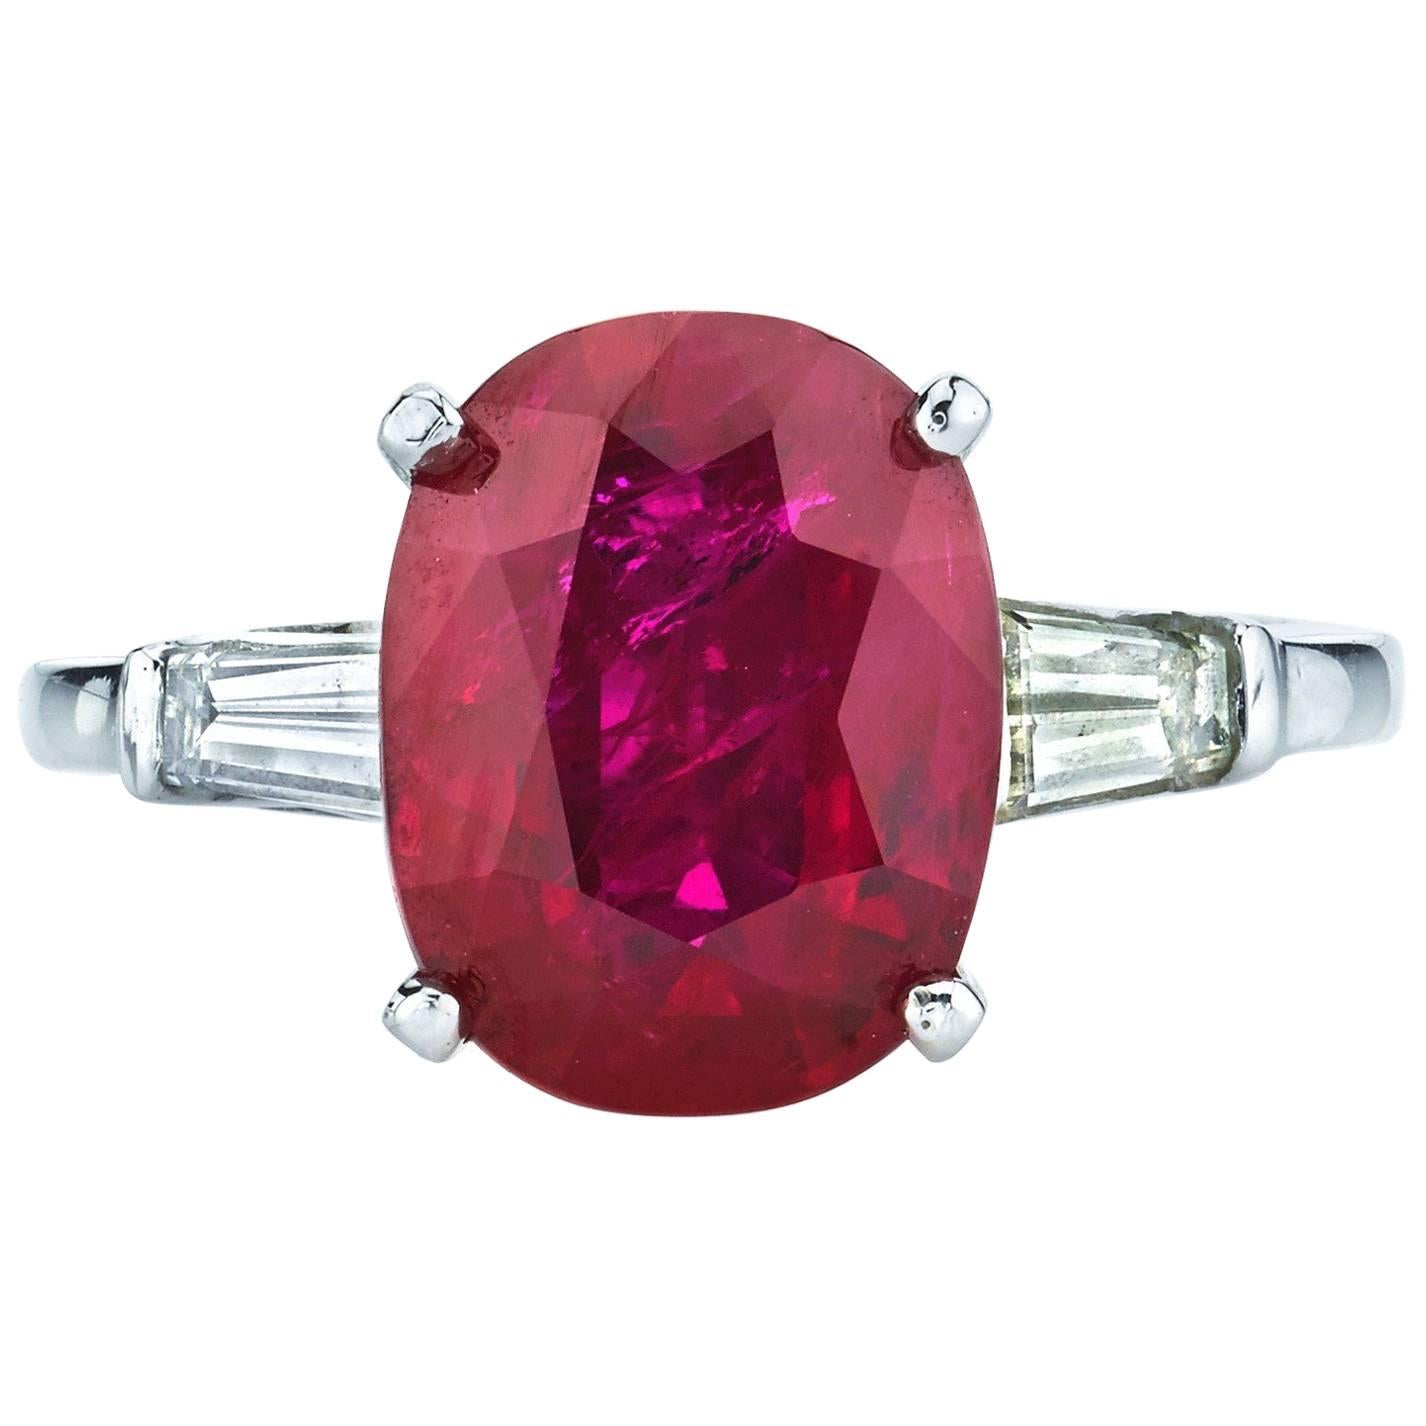 4.31 Carat GIA Certified Ruby Diamond Platinum Ring For Sale